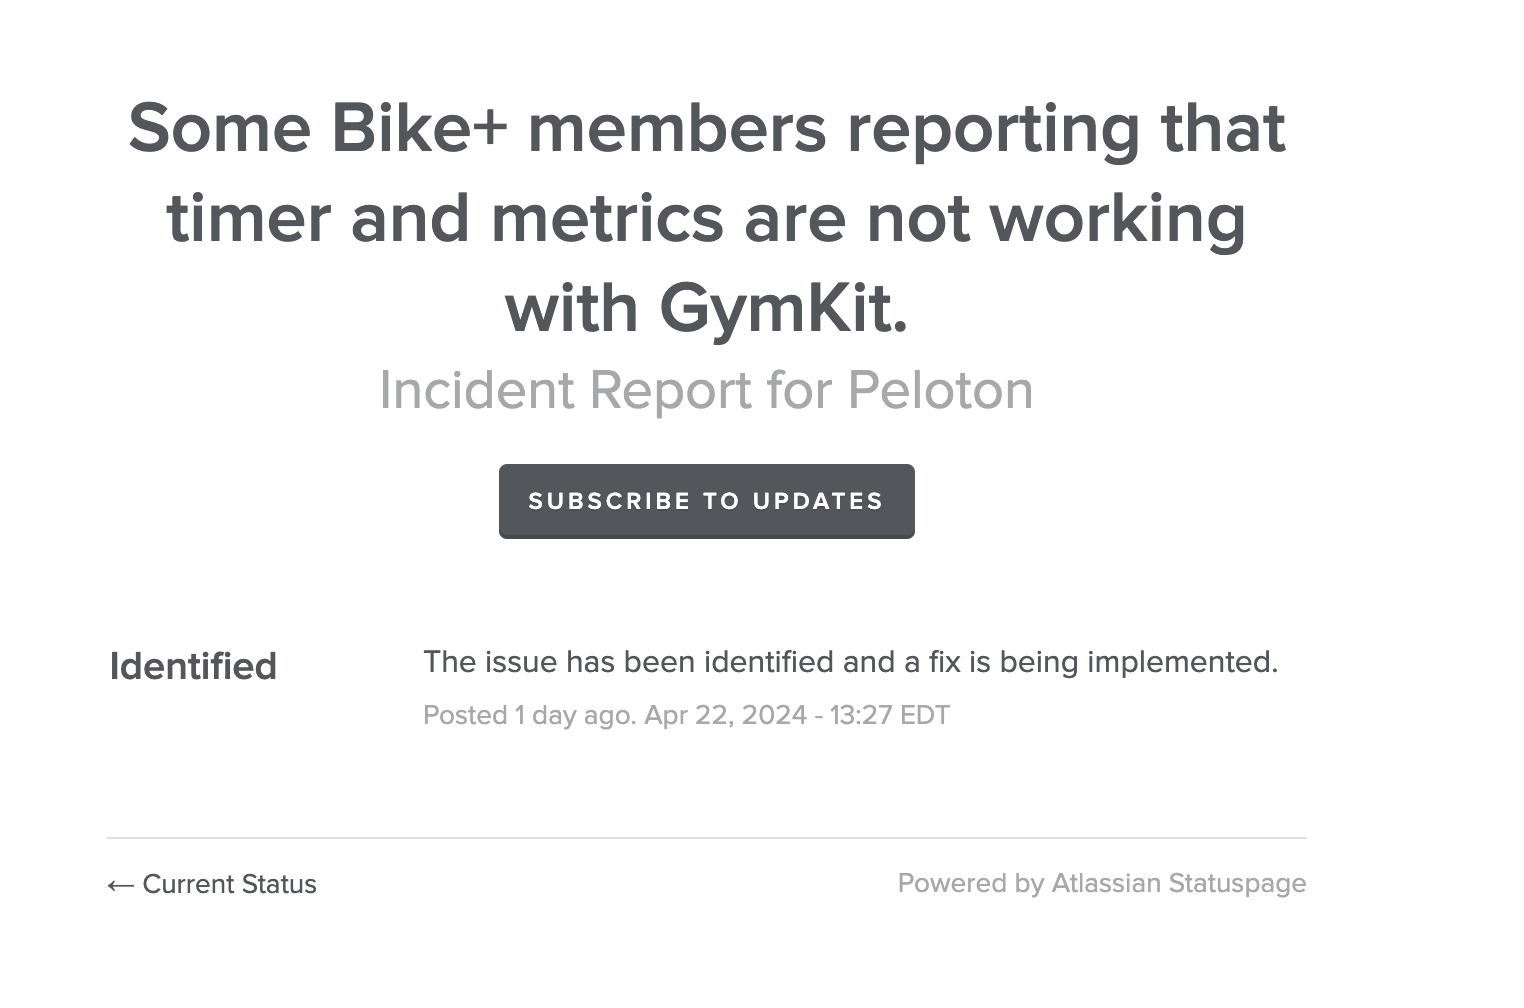 New bug related to Apple Watch GymKit & Peloton Bike+ being fixed